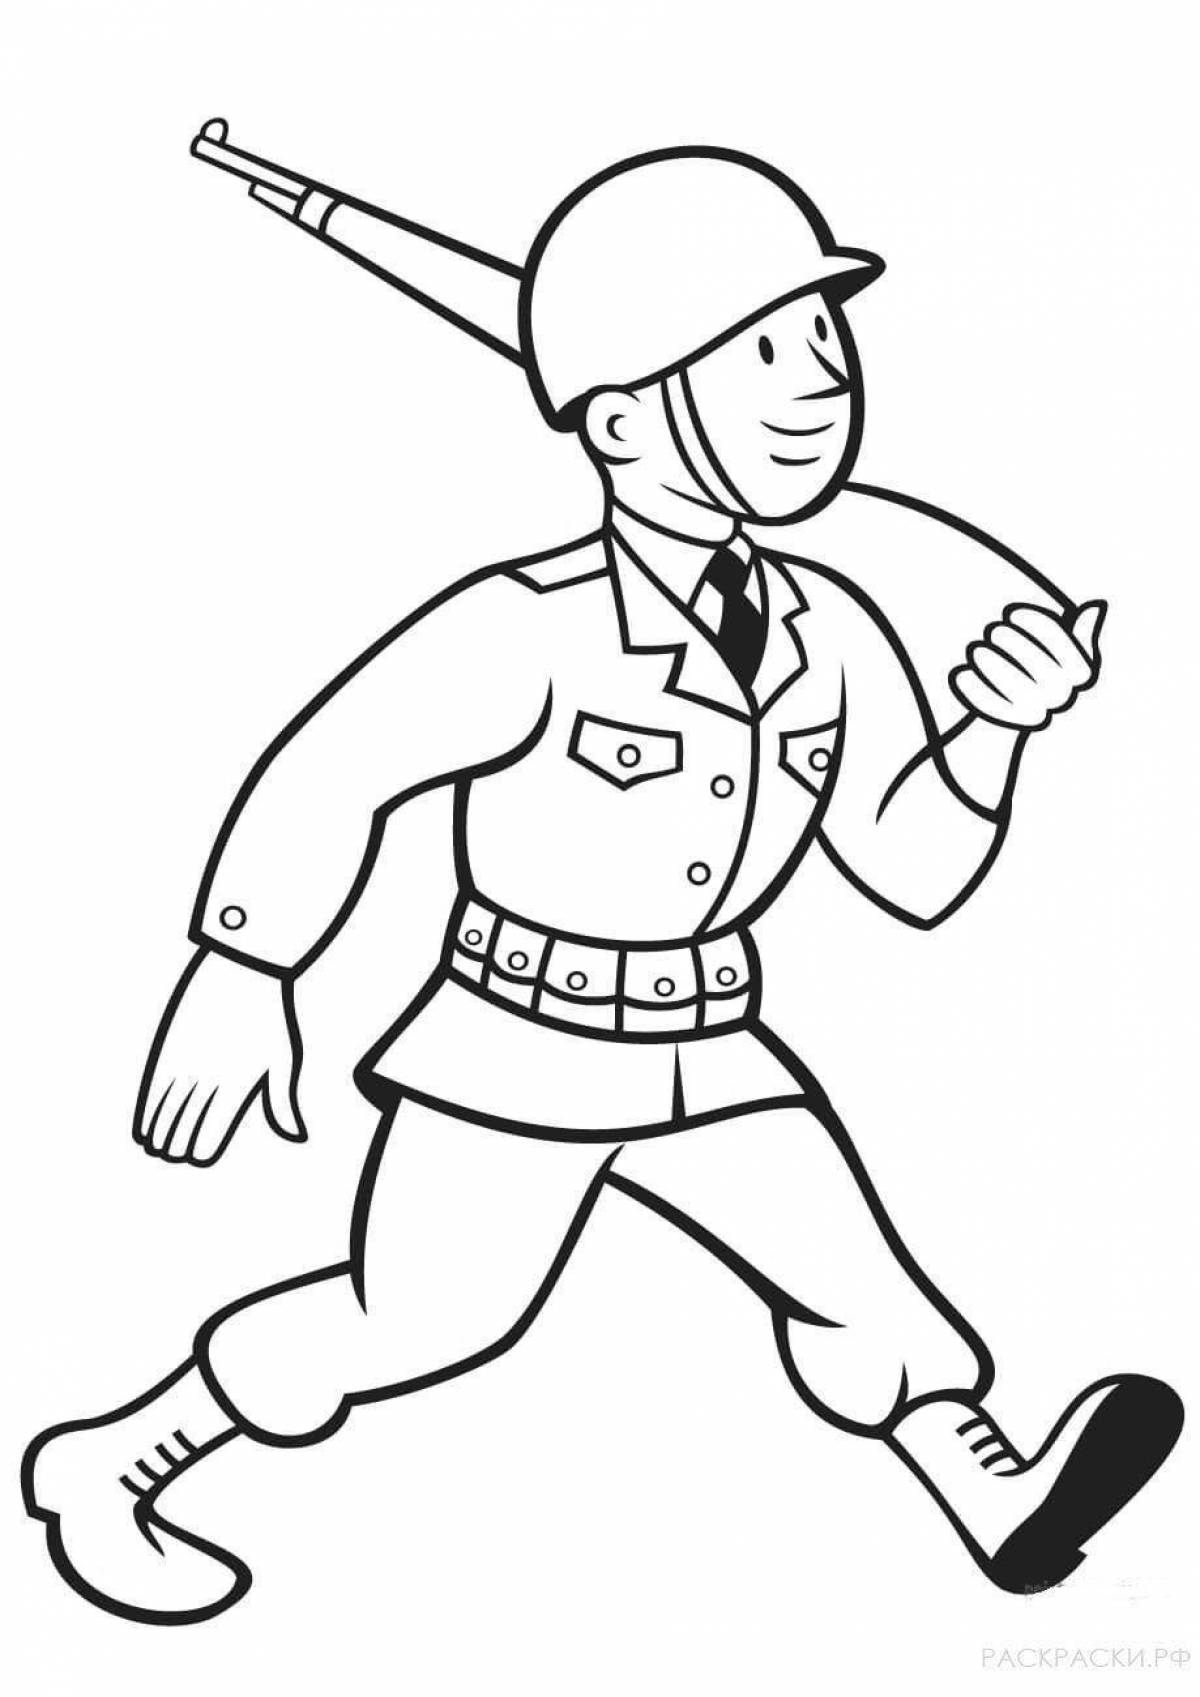 Fun toy soldier coloring book for 3-4 year olds